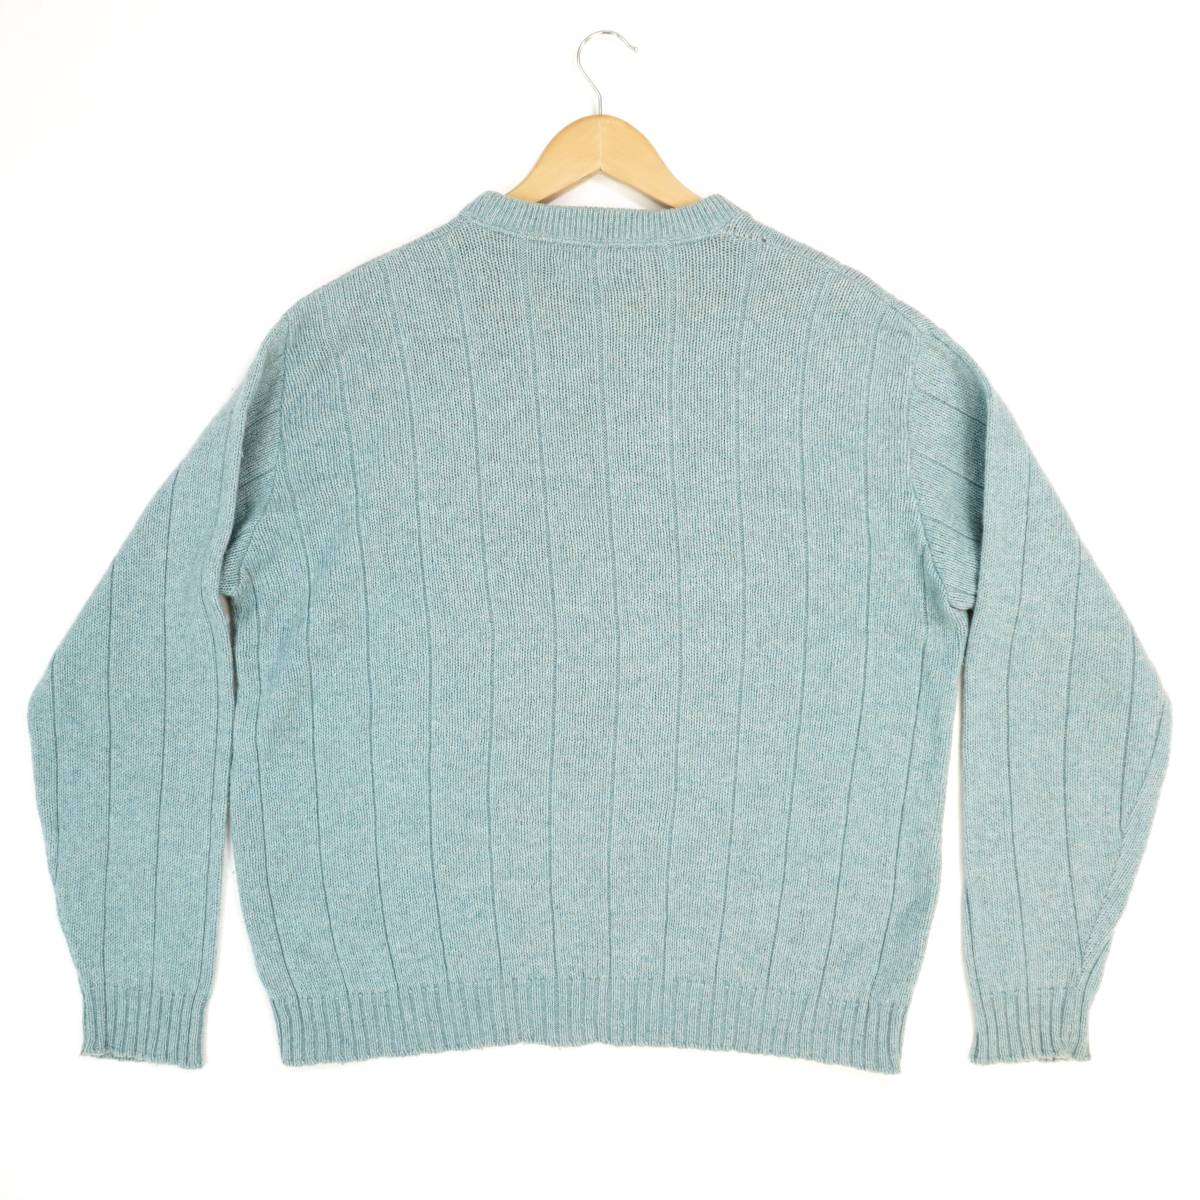 Penneys TOWNCRAFT Sweater 1960s USA SWT2410 Vintage ペニーズ タウンクラフト セーター ニット 1960年代 ヴィンテージ